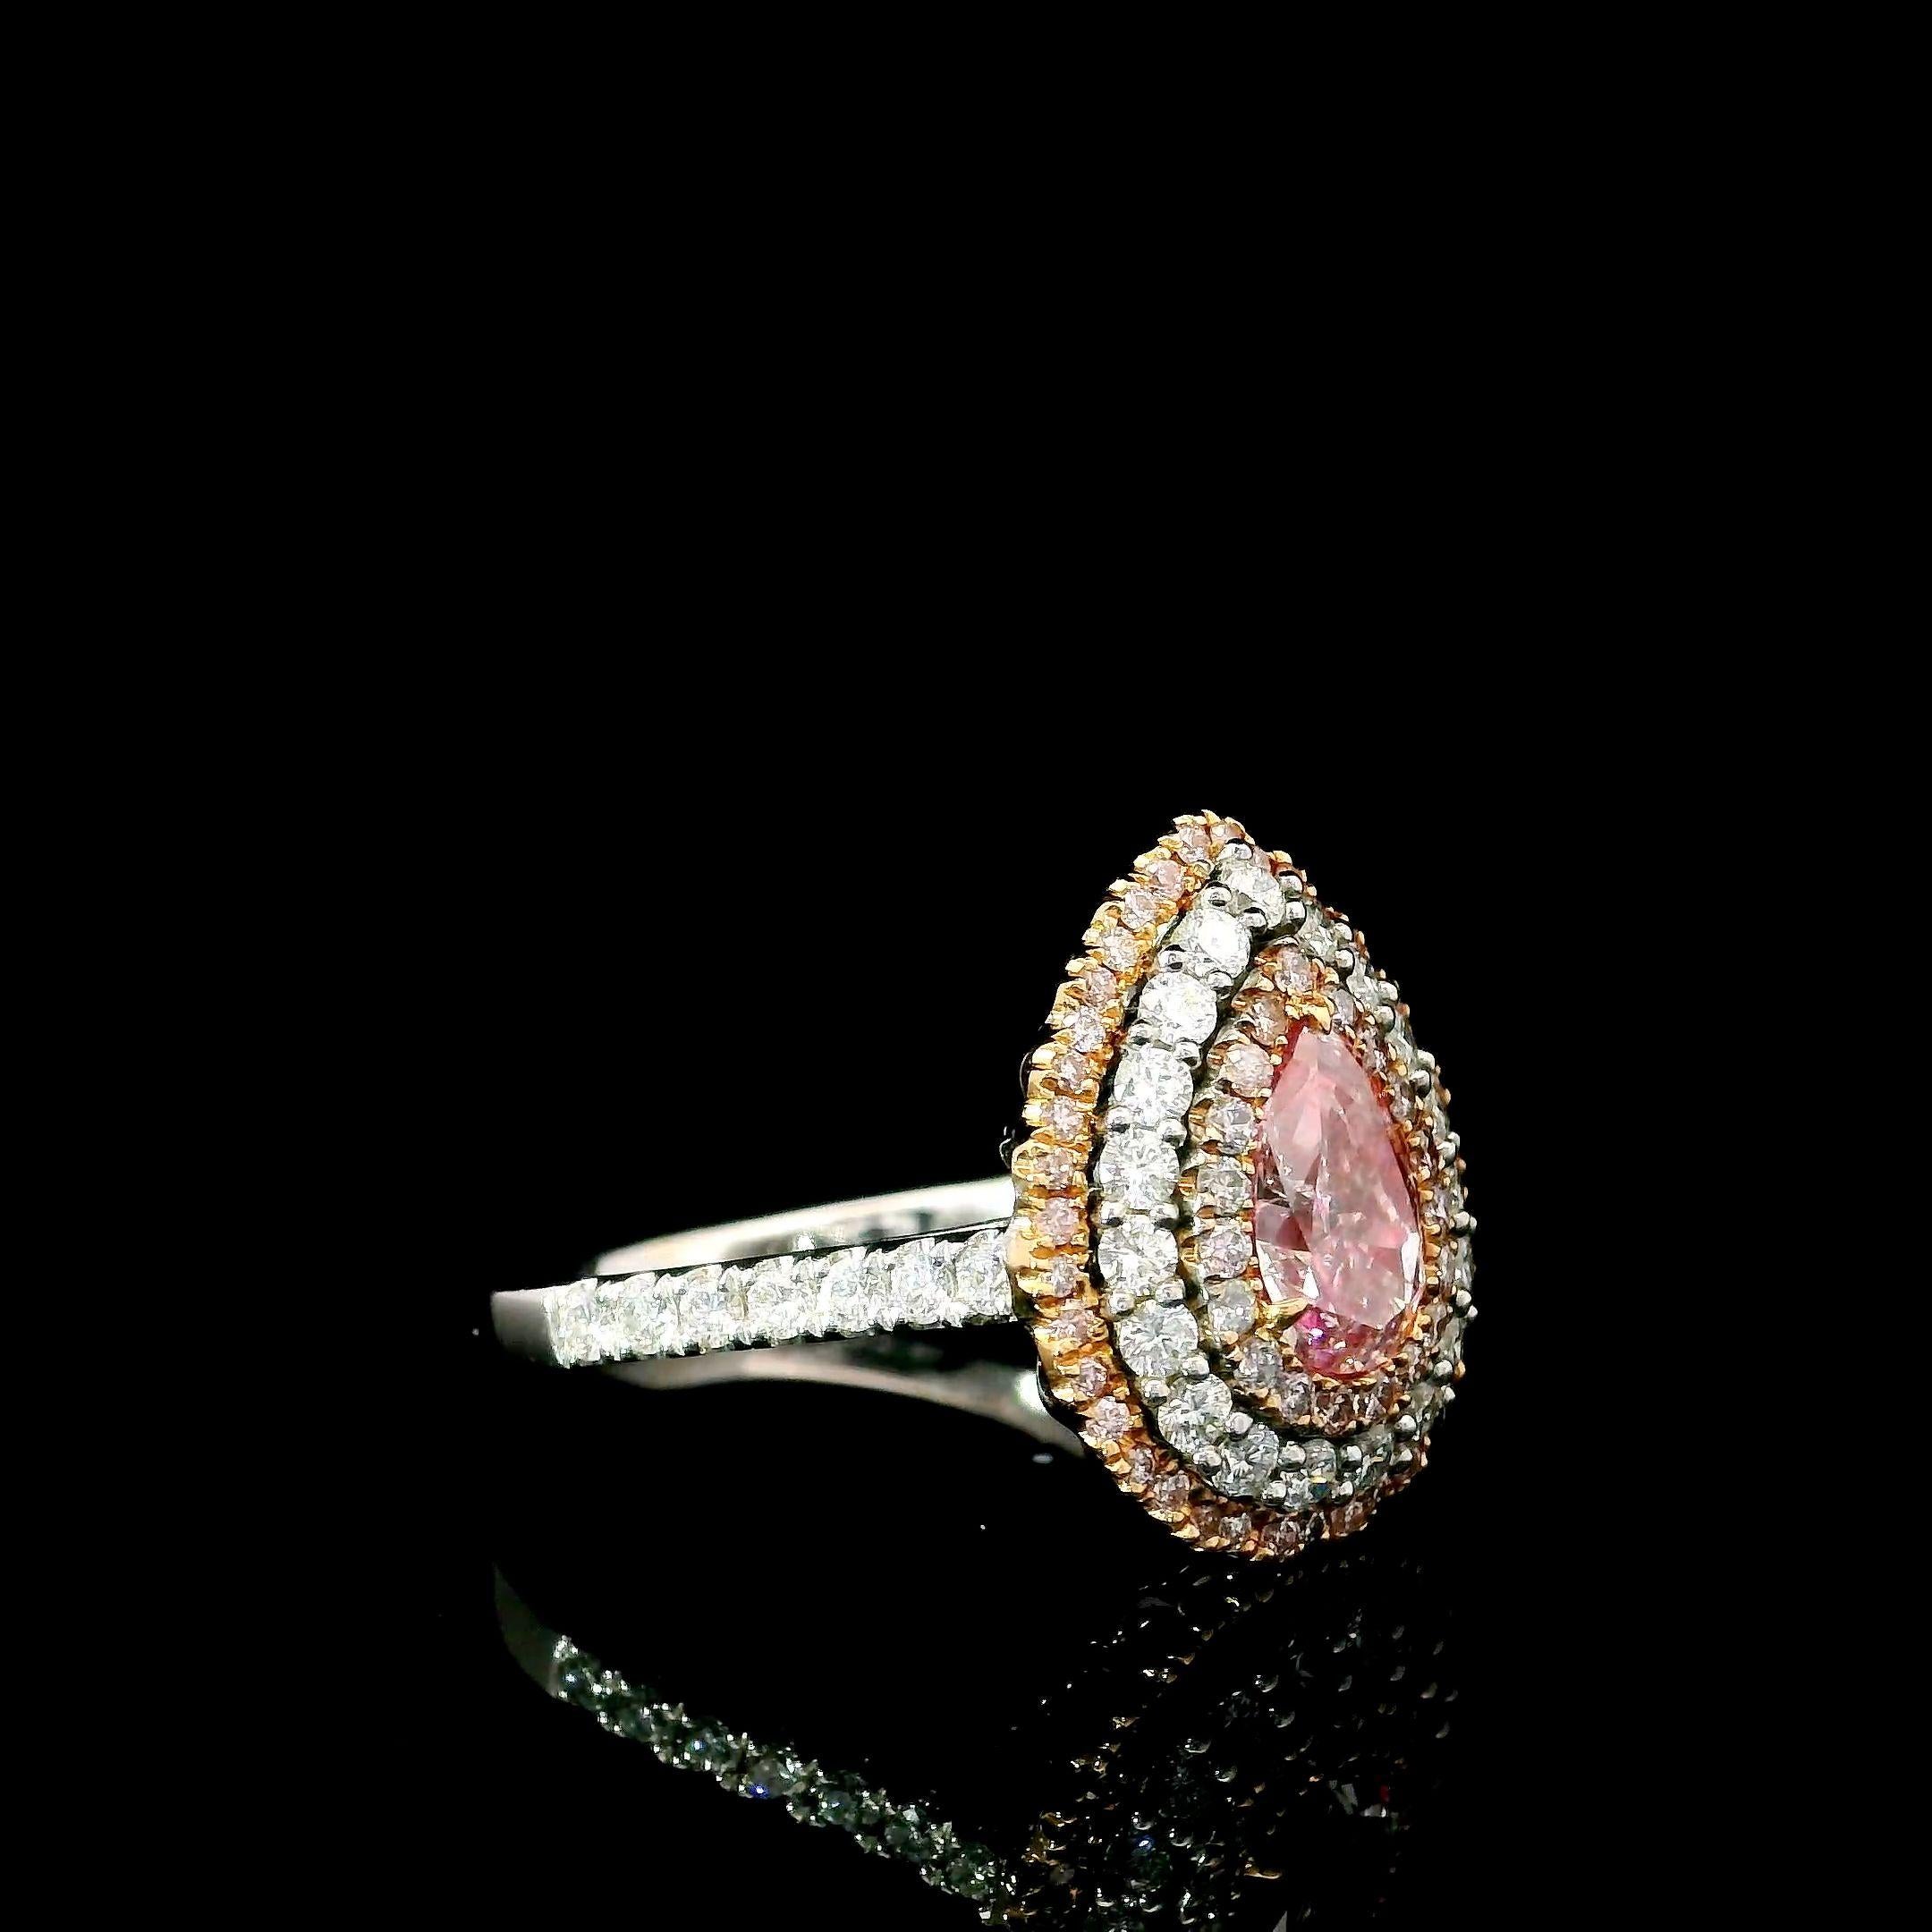 Women's 1.00 Carat Light Pinkish Brown Diamond Ring I1 Clarity GIA Certified For Sale